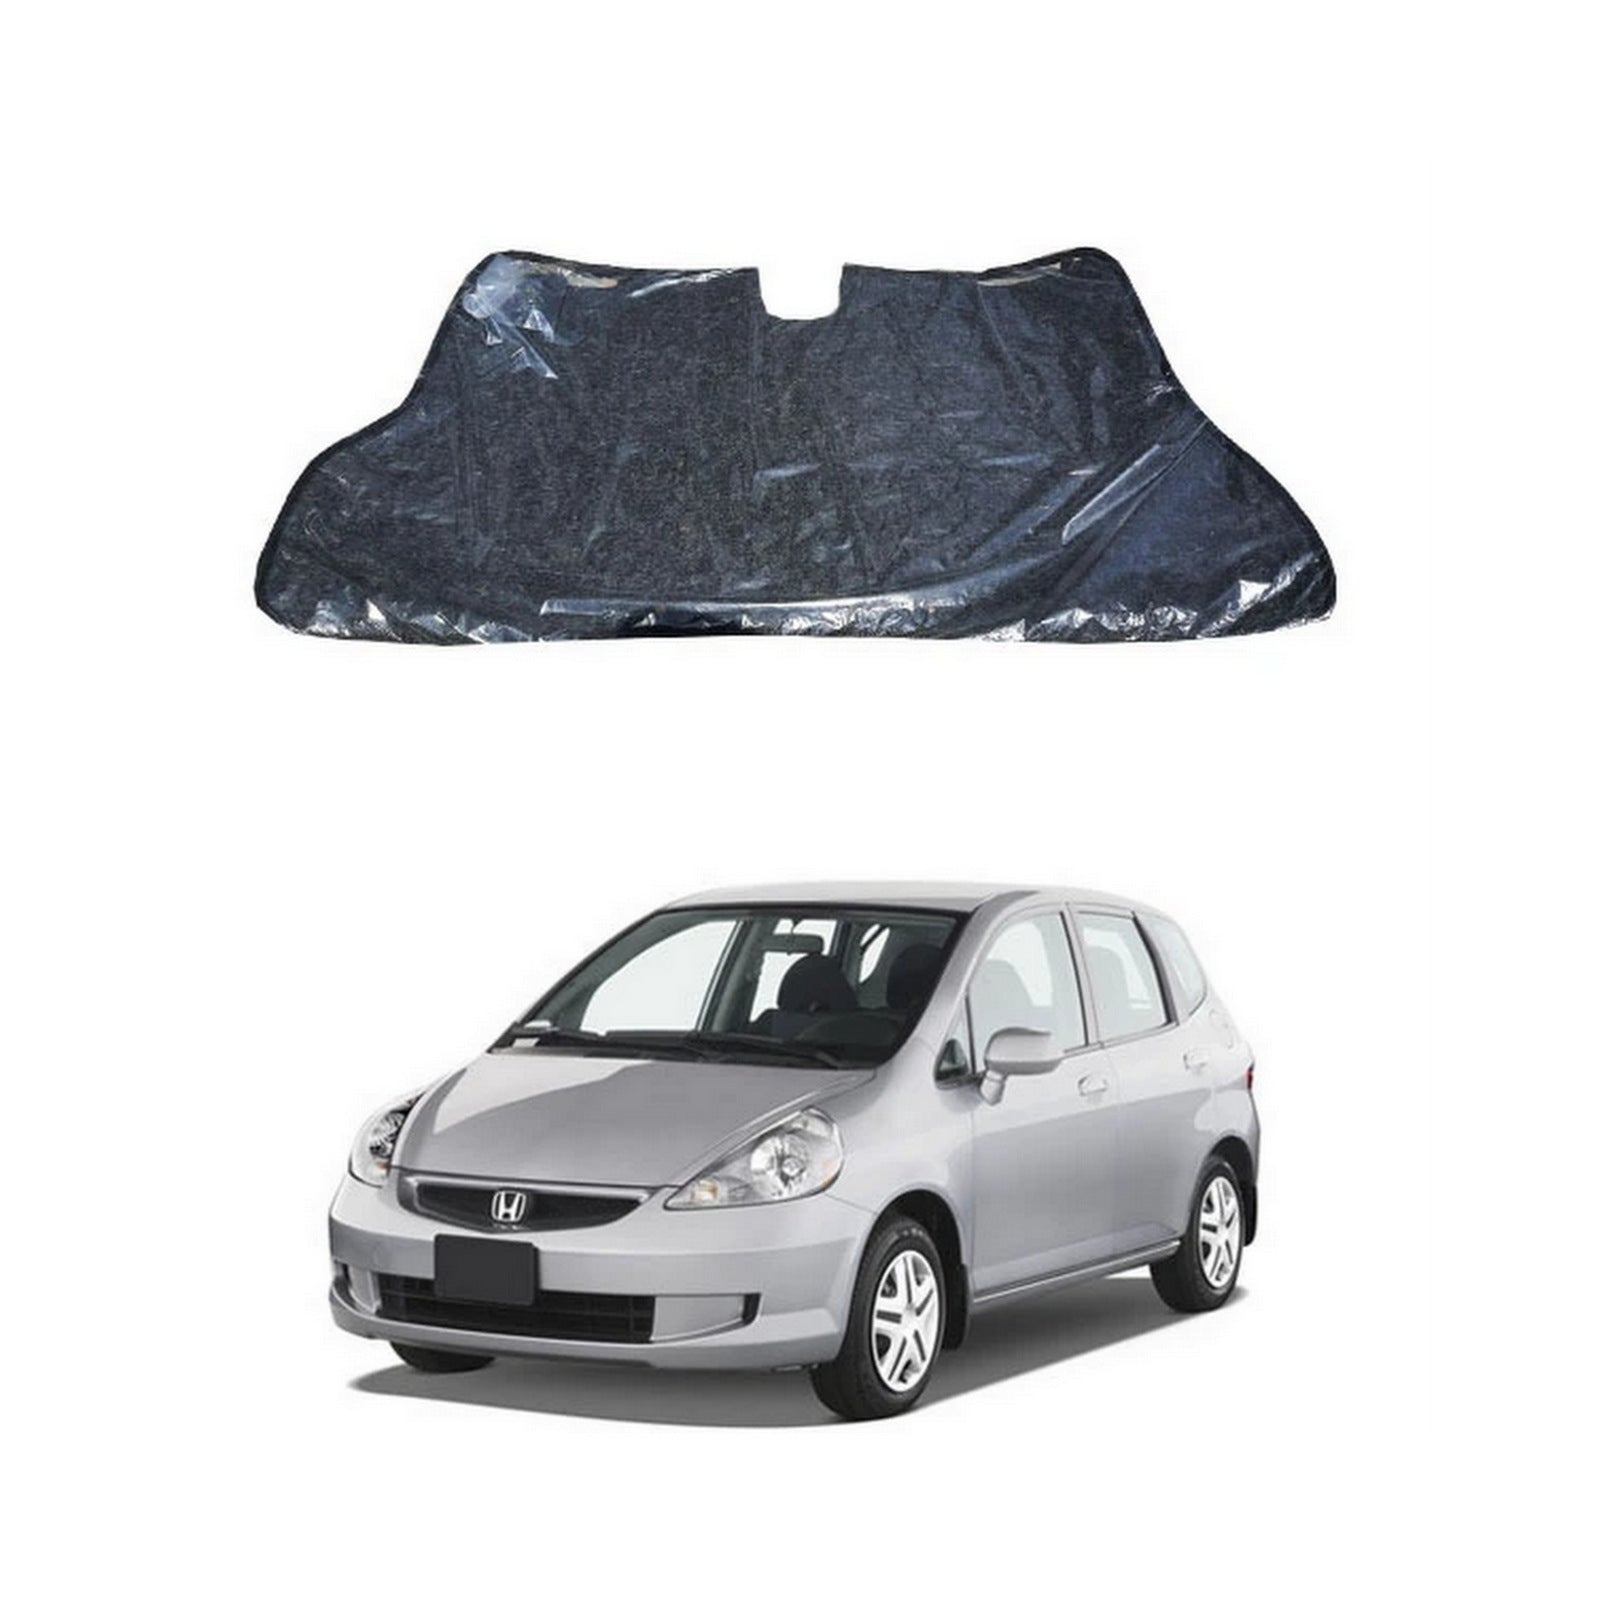 TRUNK LINER PROTECTOR FOR HONDA FIT (2007-2013)